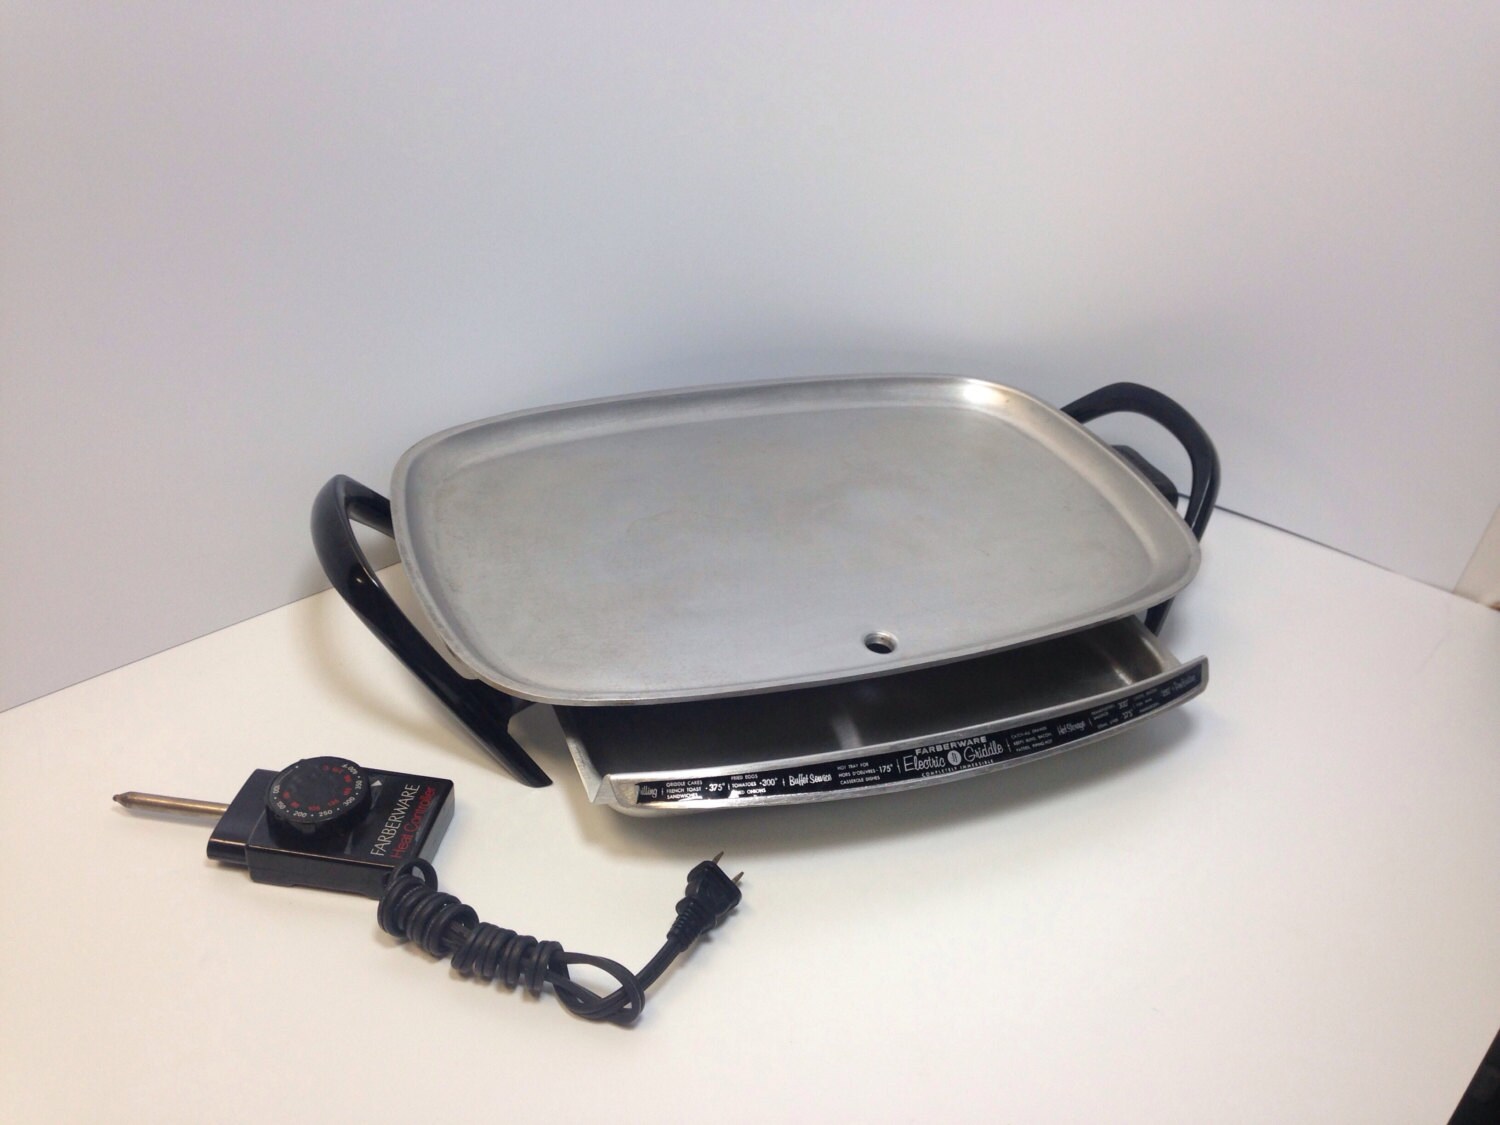 Farberware Electric Griddle No. 260 - First Use